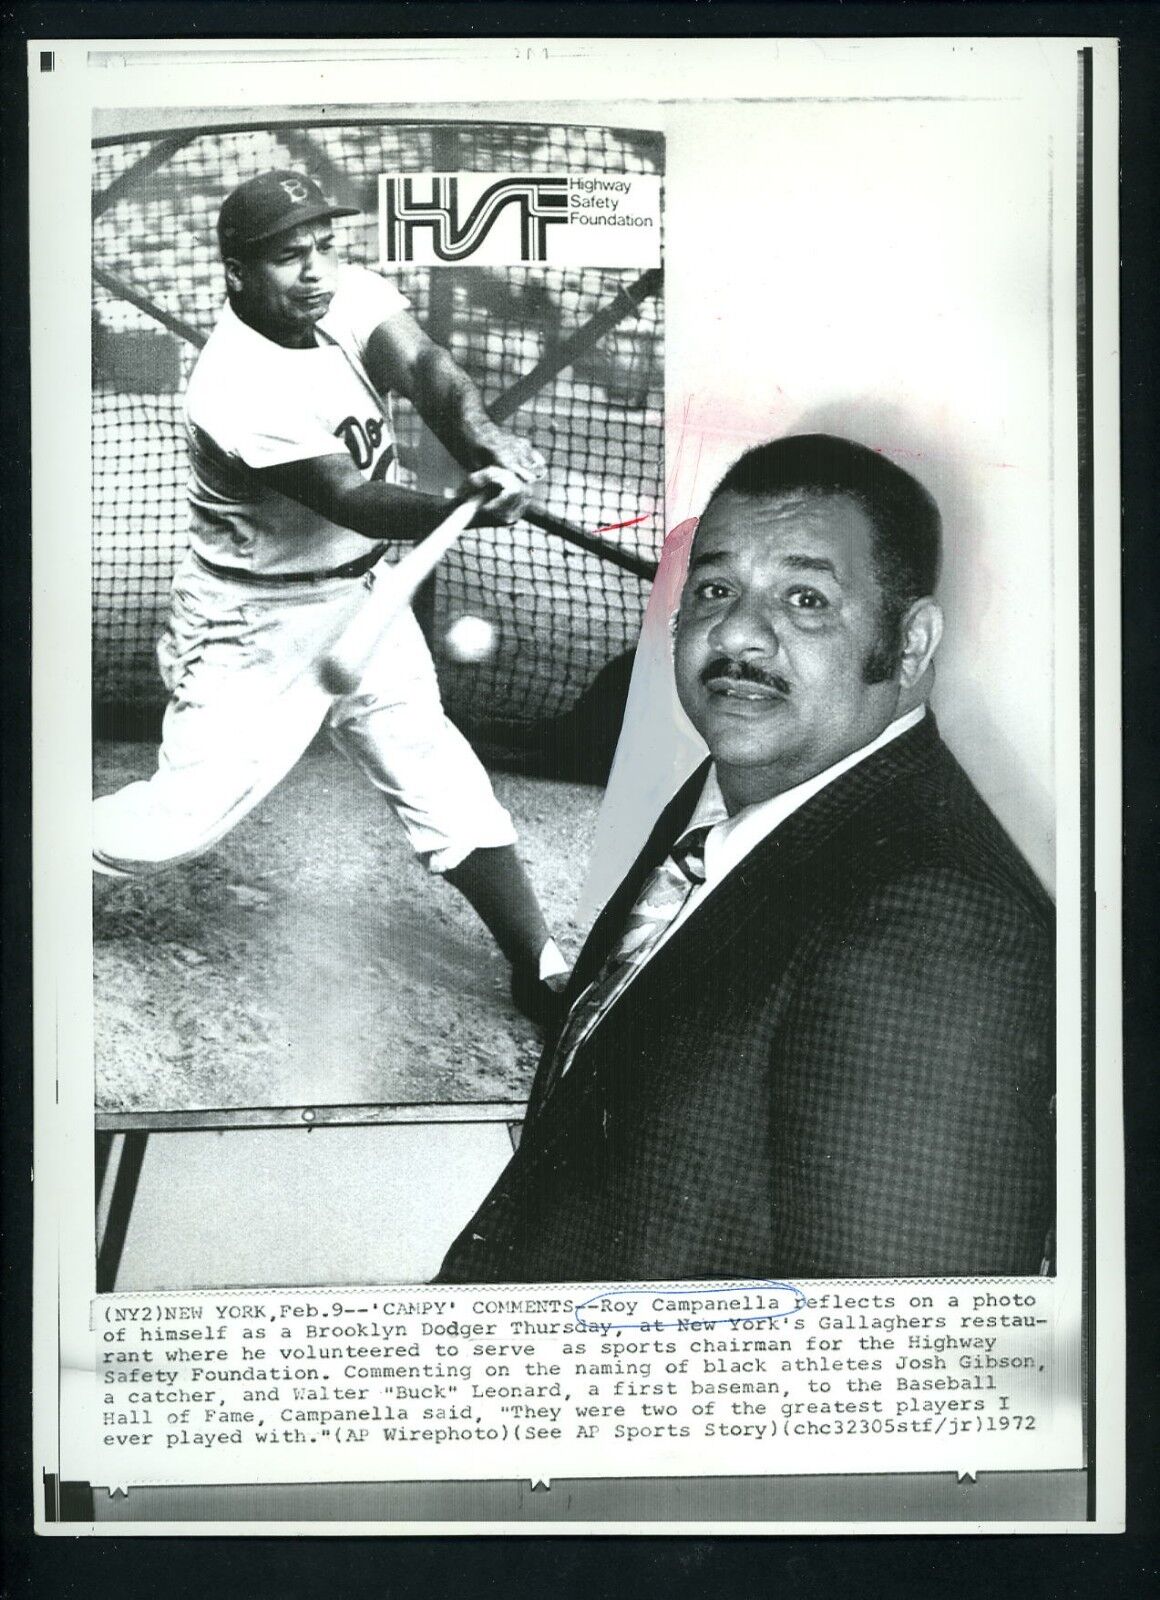 Roy Campanella 1972 Press Photo Poster painting New York's Gallaghers Restaurant Dodgers